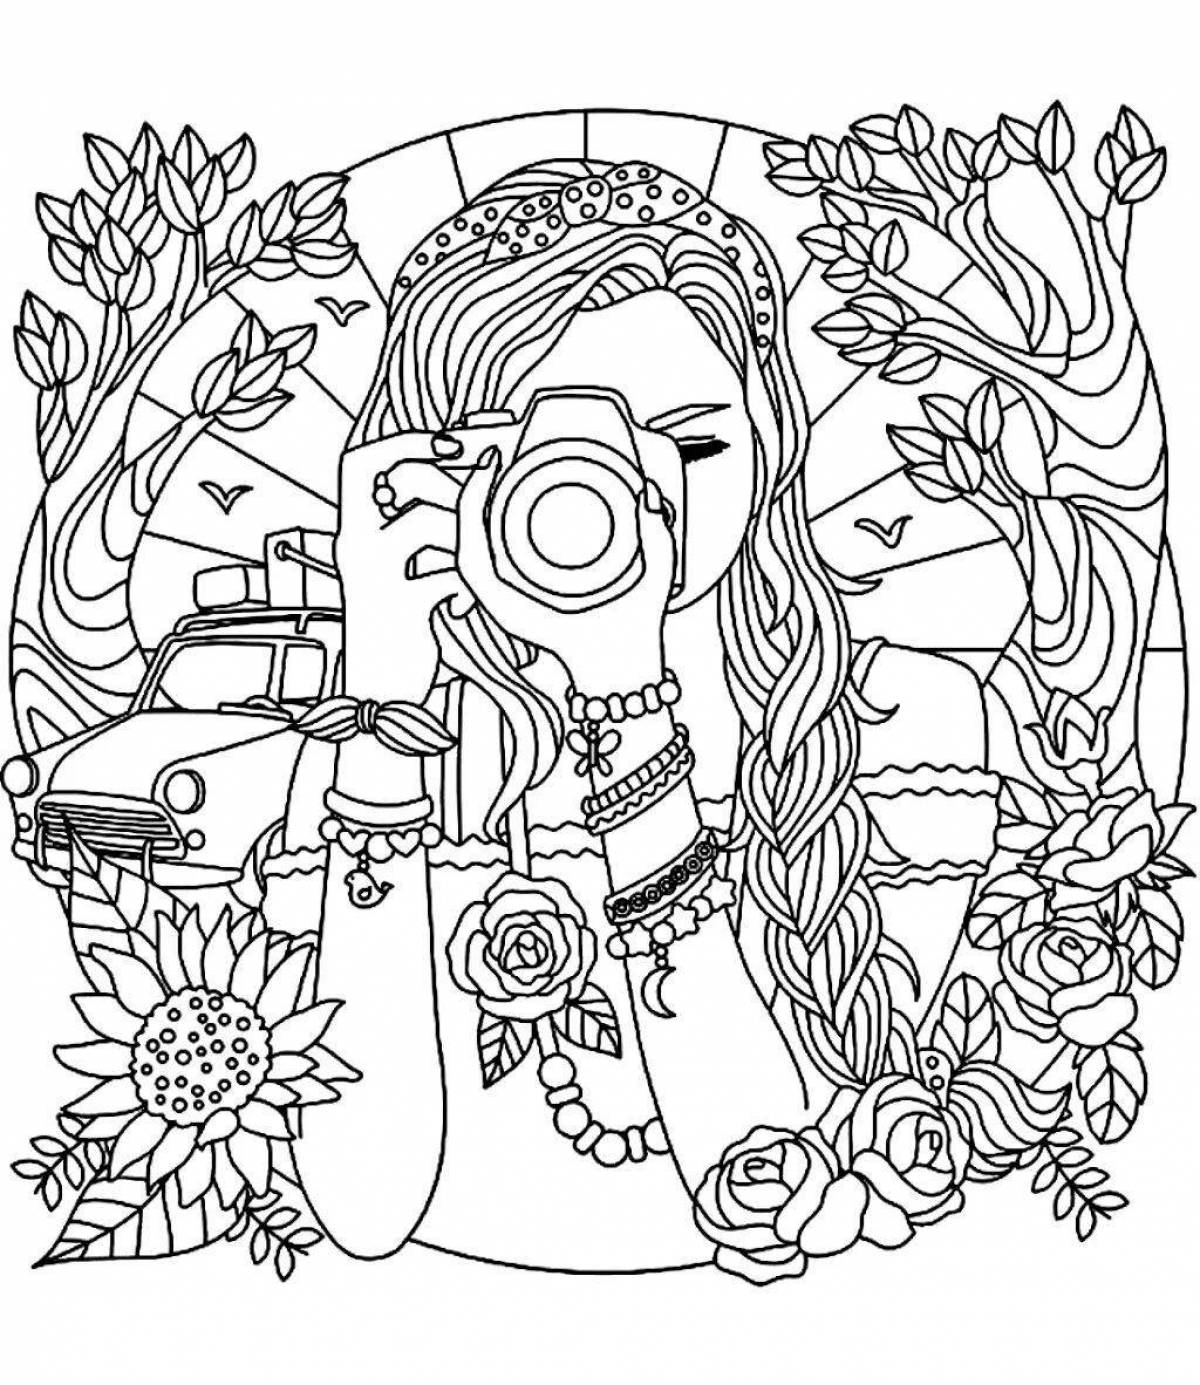 Sharp adult coloring page